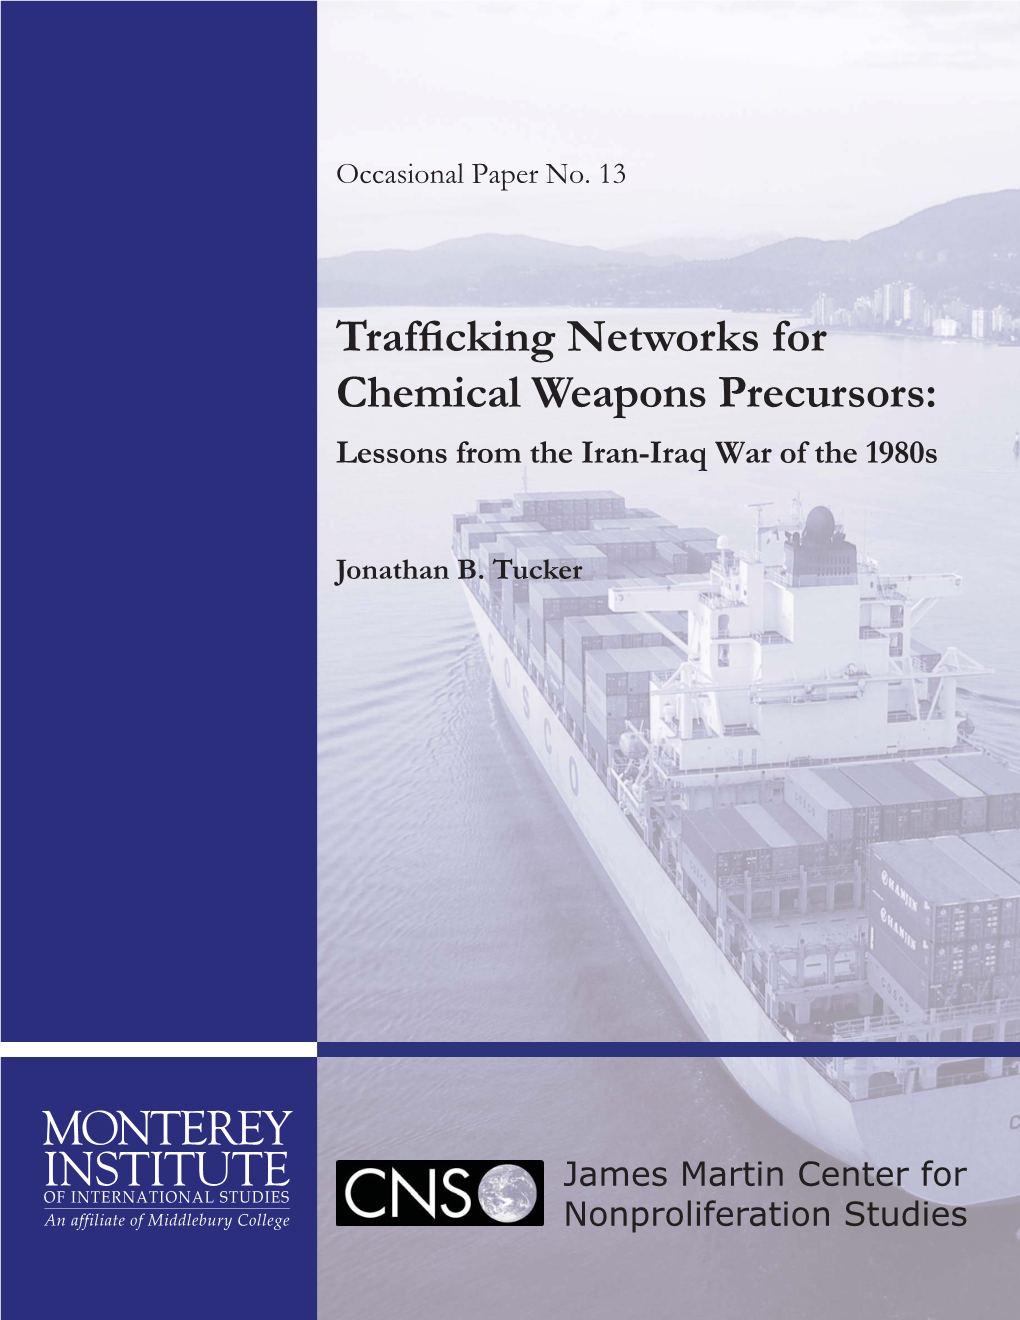 Trafficking Networks for Chemical Weapons Precursors